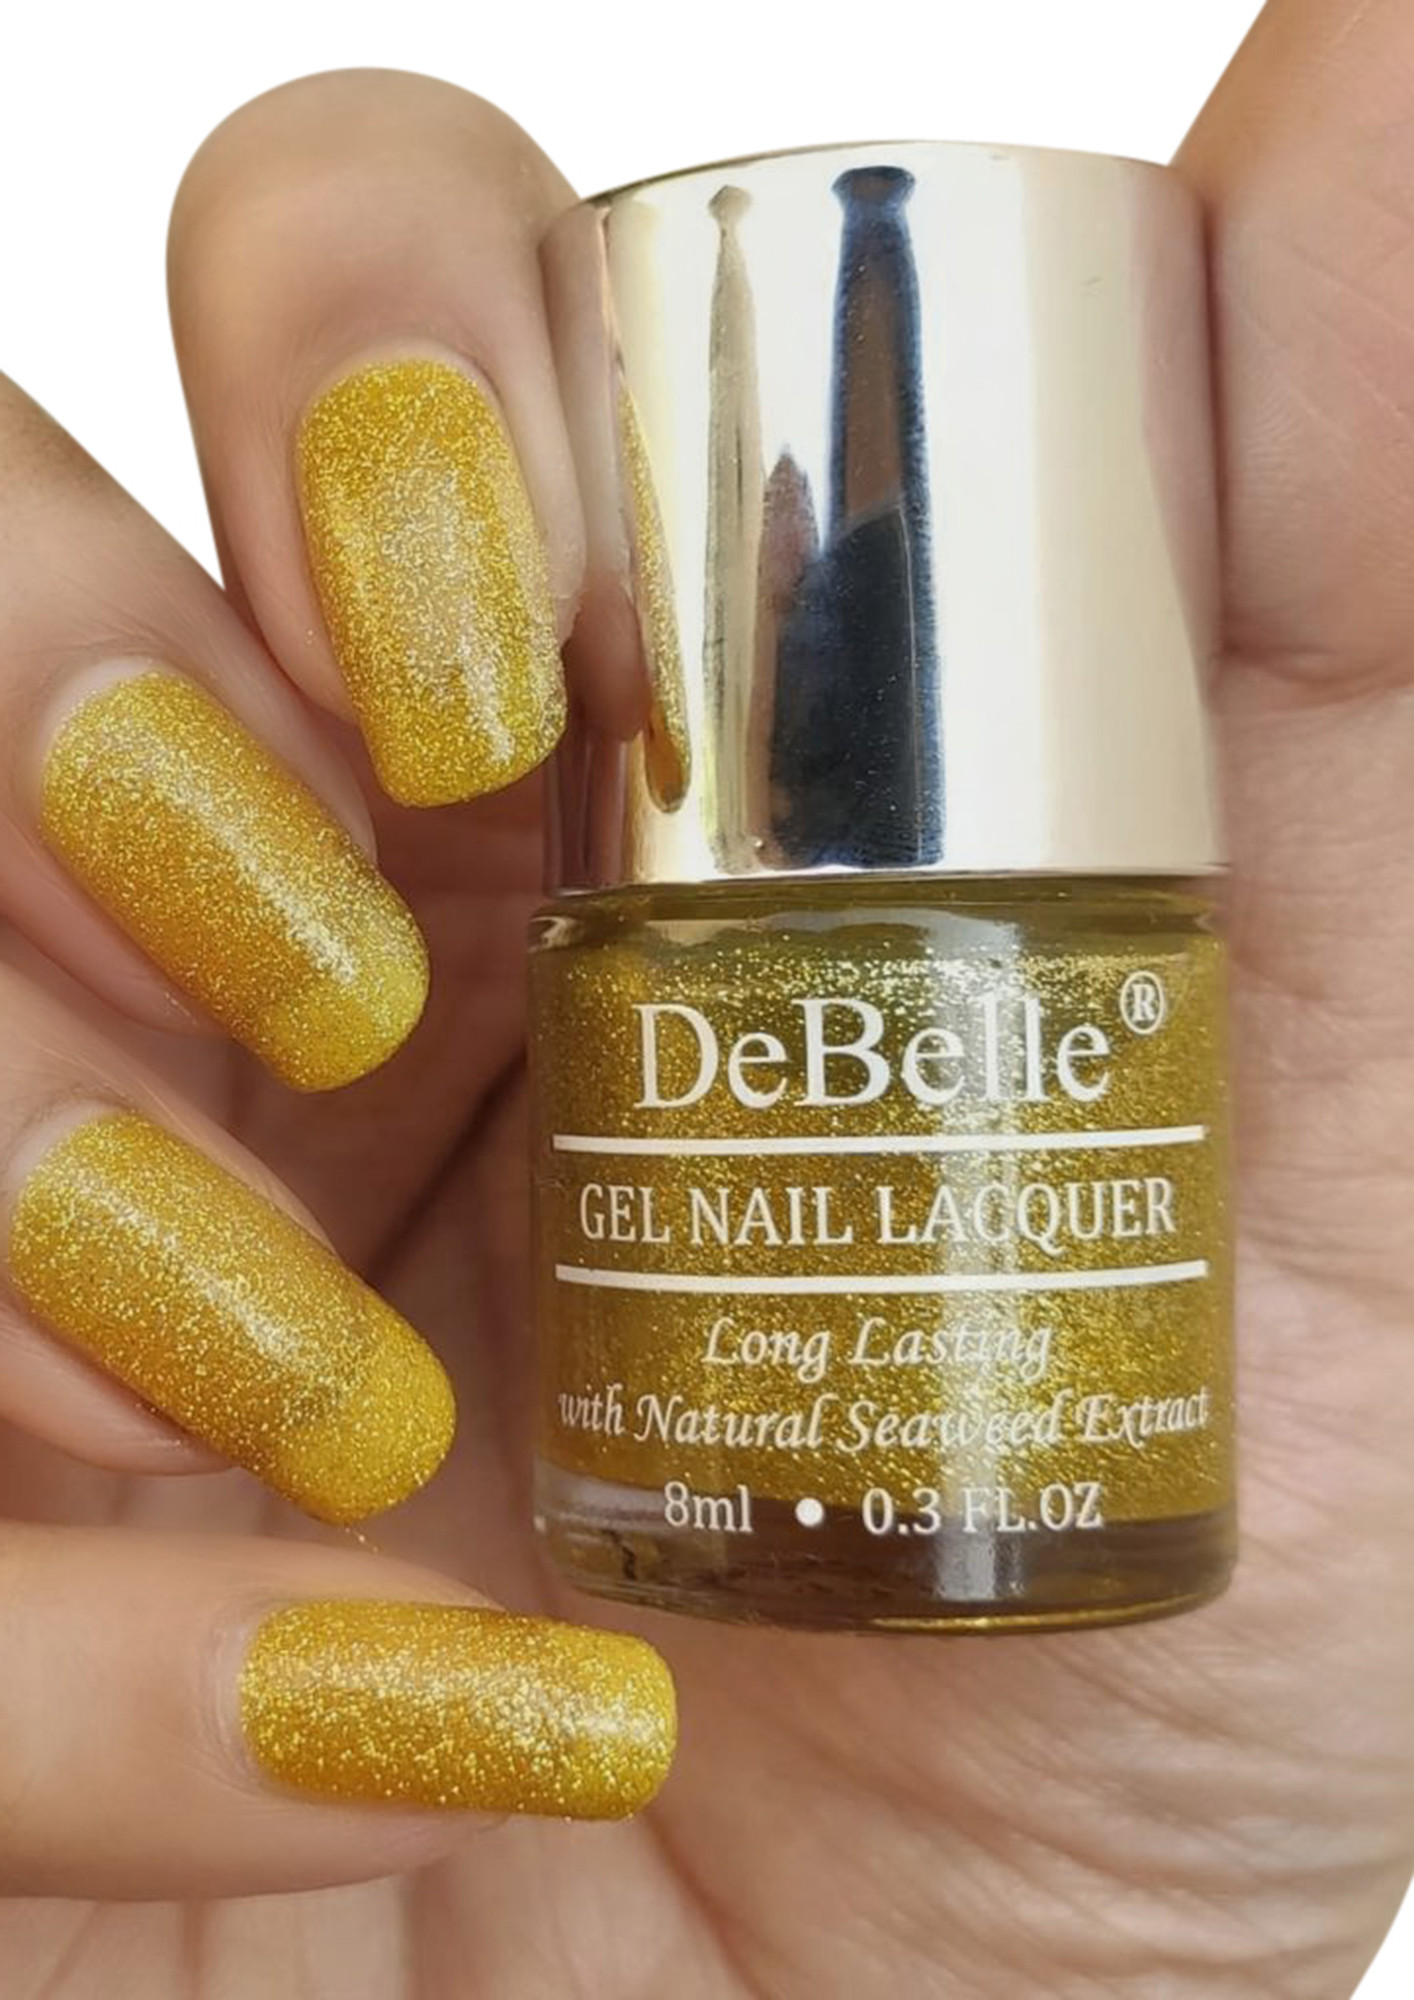 45 gold nails that are trending right now – Scratch